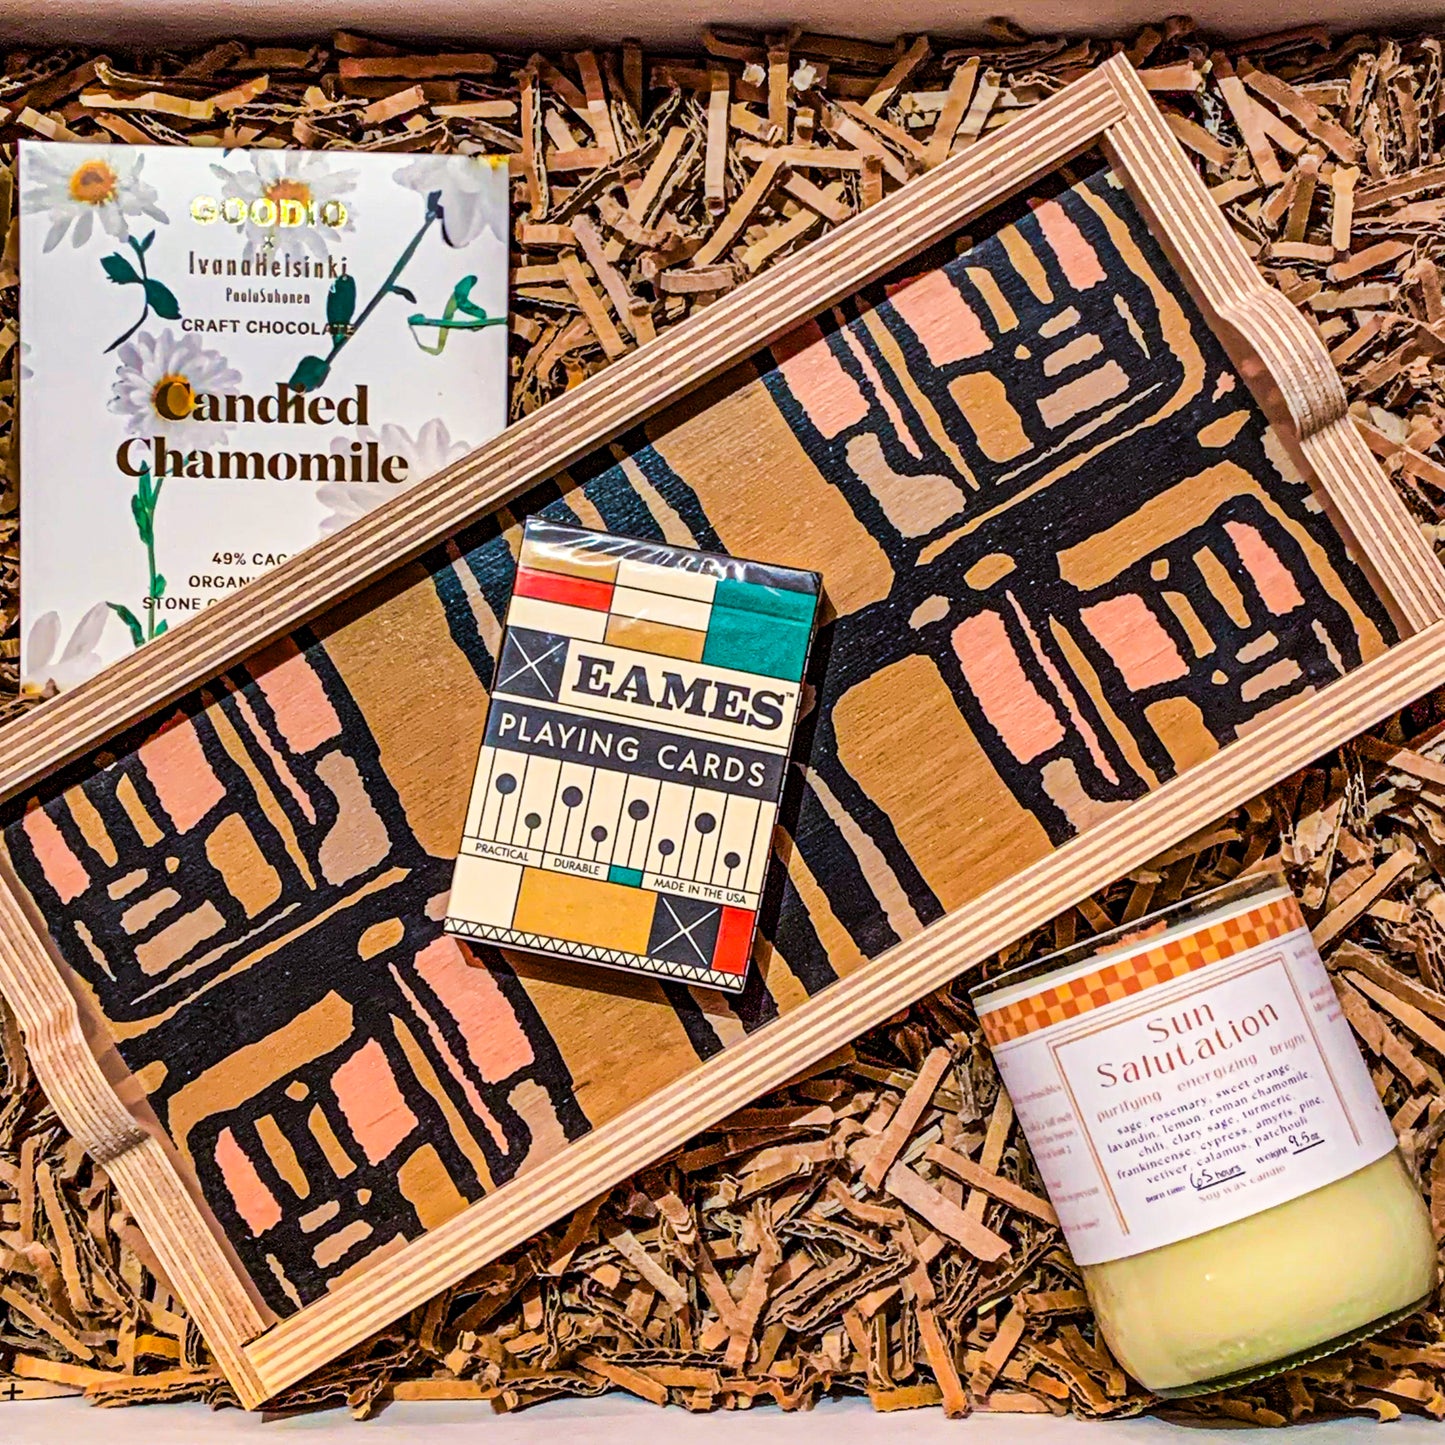 Eco-friendly housewarming Gift box with an olive green decorative tray, a deck of "eames" playing cards, vegan candied chamomile chocolate, and a sage rosemary soy wax candle